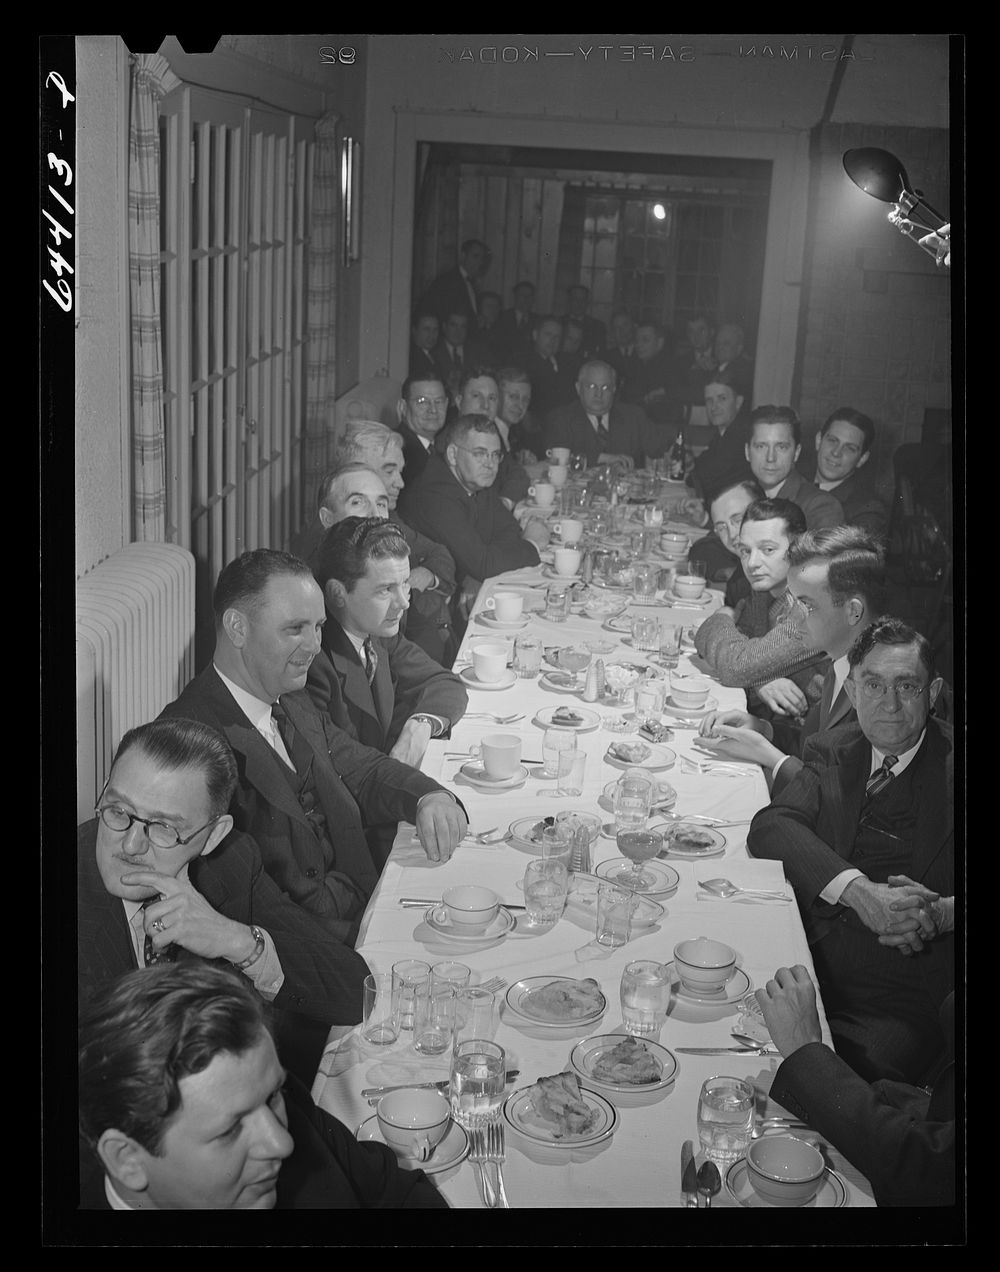 Portsmouth, Ohio. Elks' banquet at the country club. Sourced from the Library of Congress.